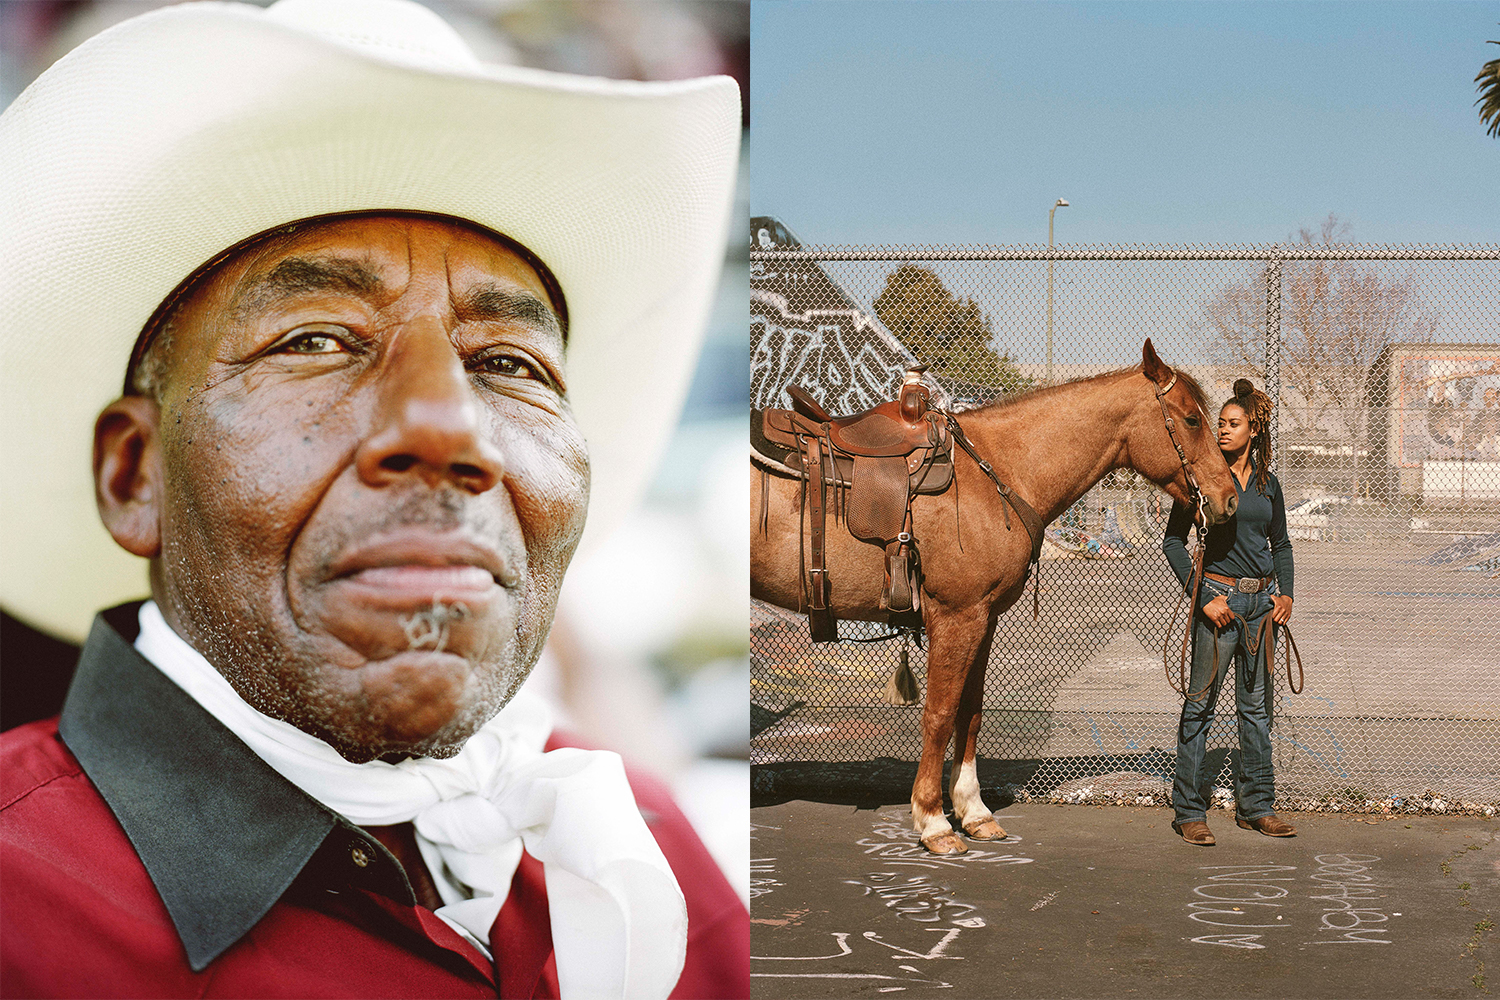 A Black cowboy and black cowgirl from Gabriela Hasbun's new book "The New Black West'